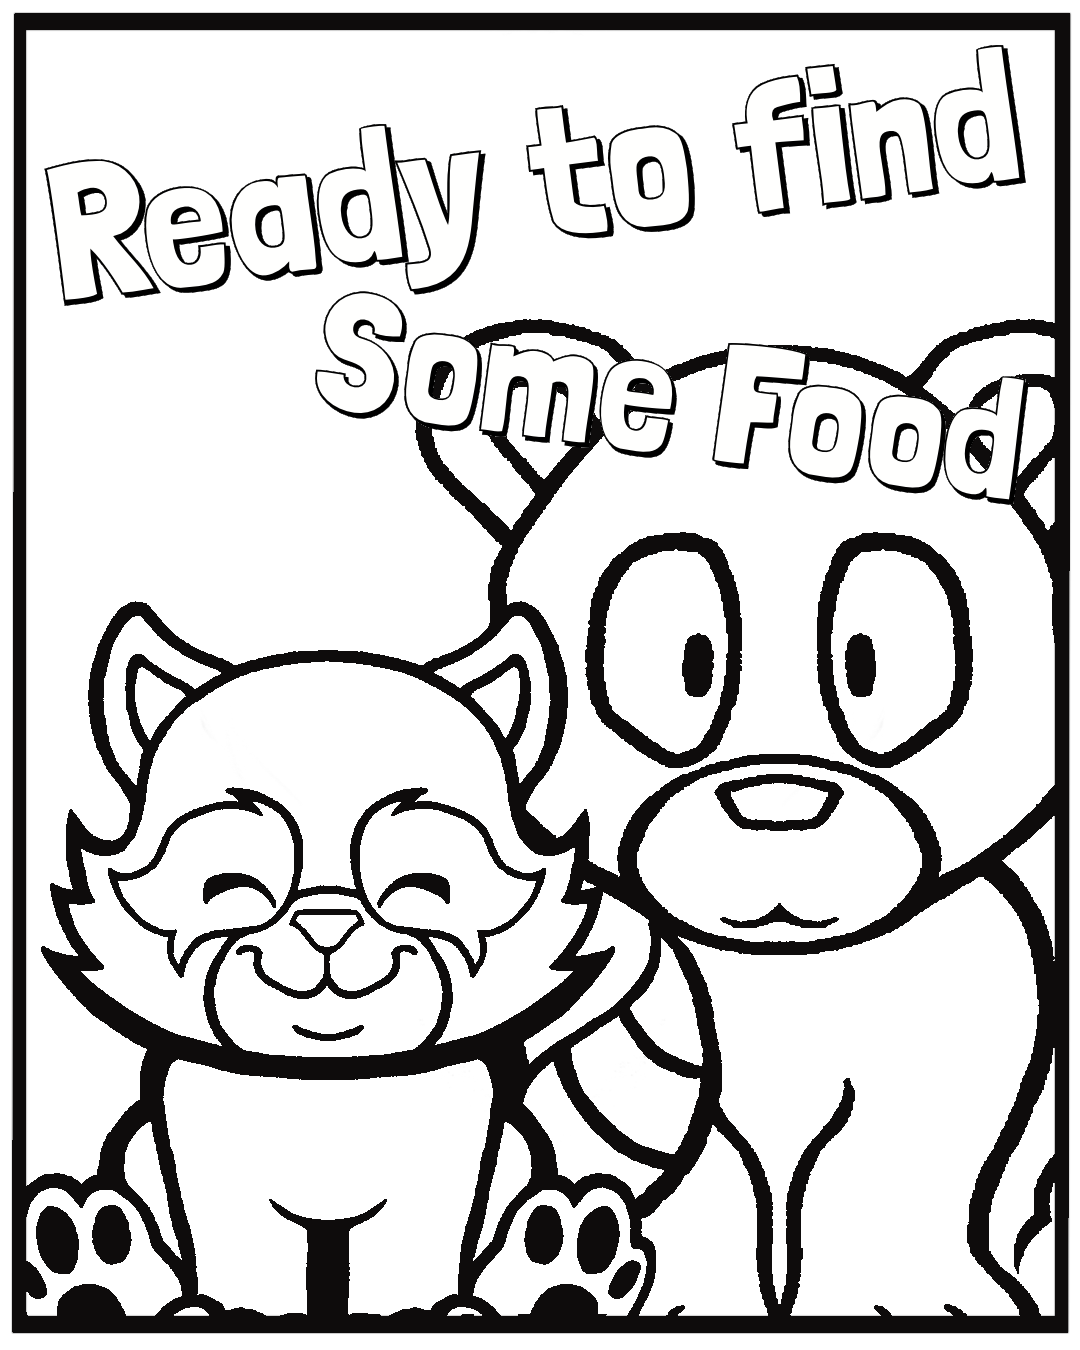 Slime coloring page - TheRedScorpion's Ko-fi Shop